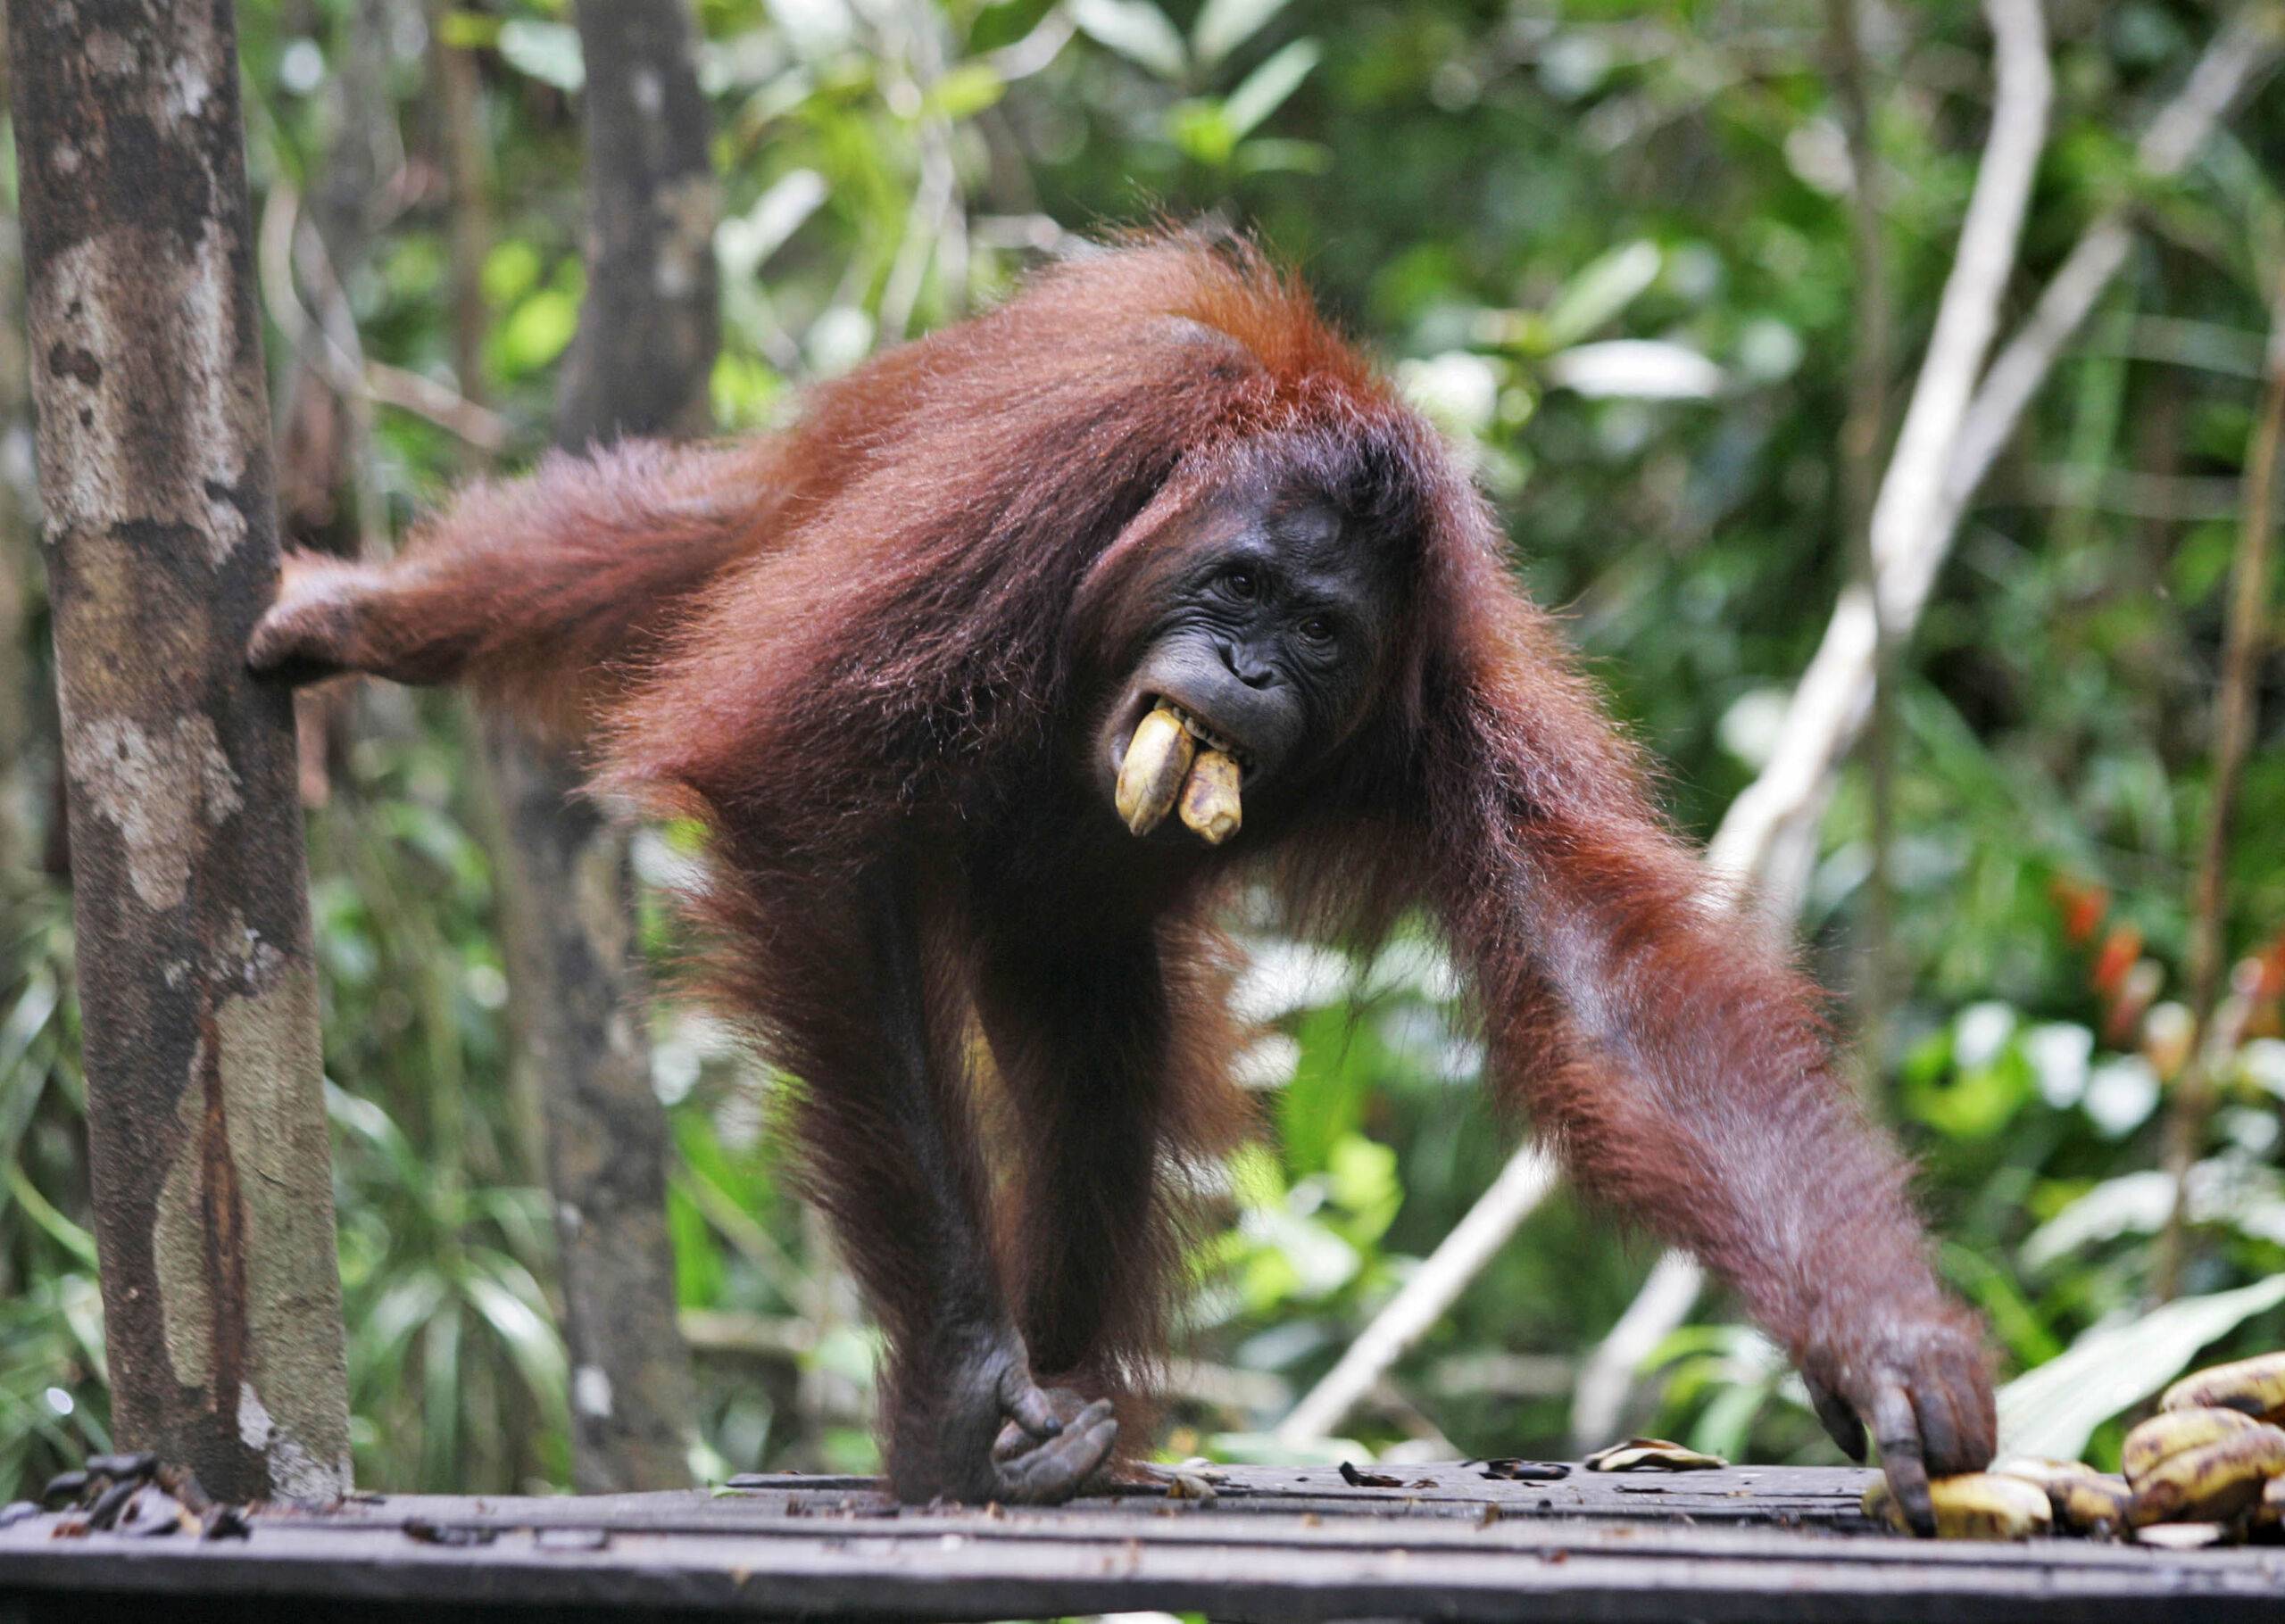 Coloration of the Red Apes of Borneo